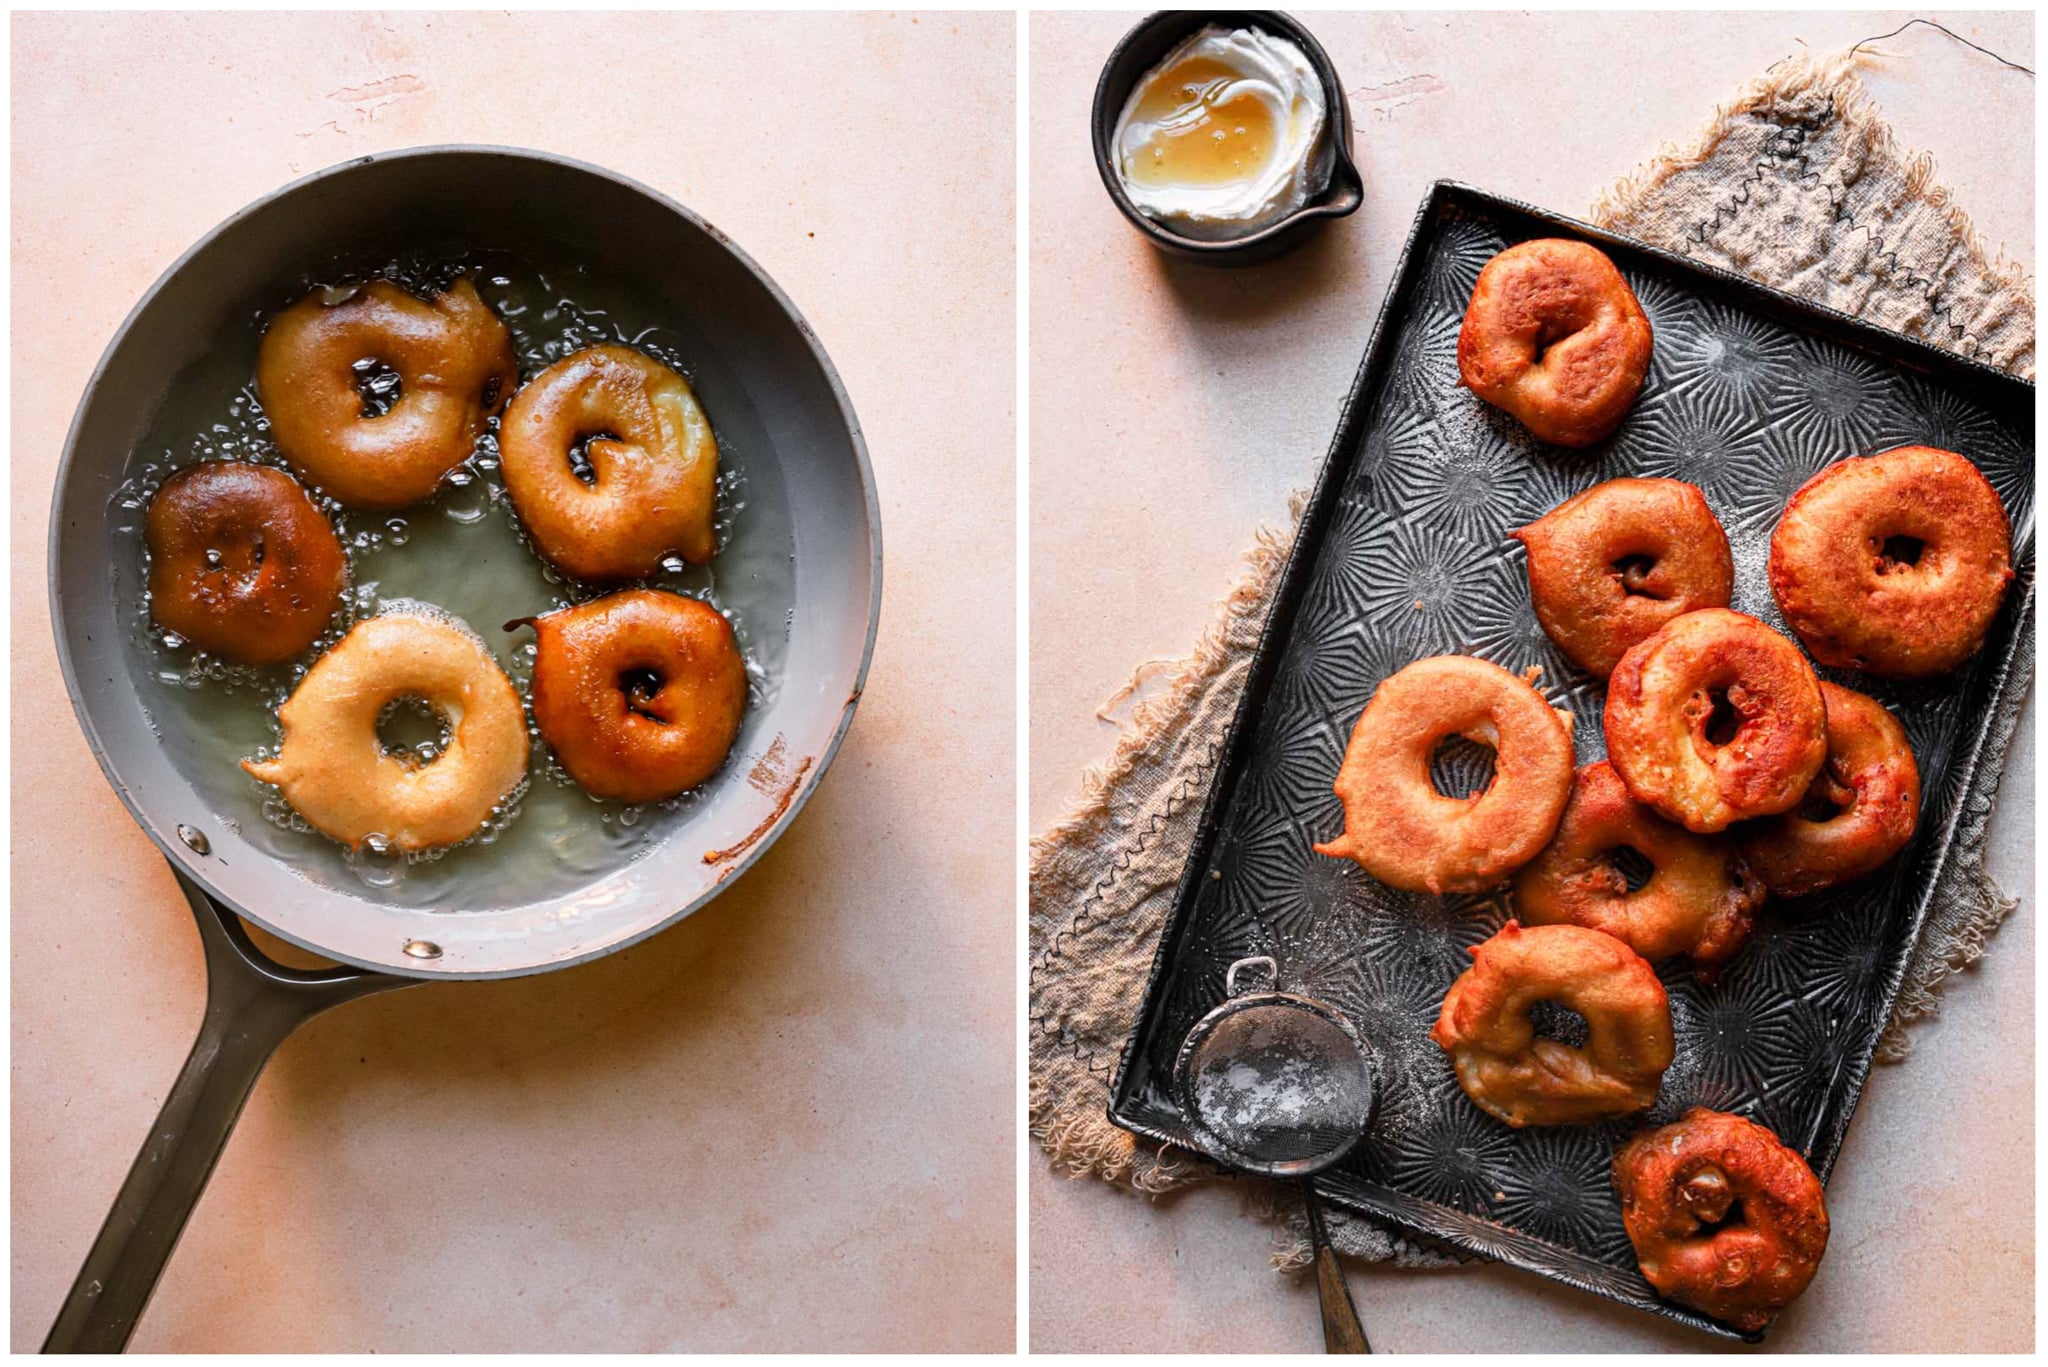 Side-by-side photos show the process of how to make homemade apple fritters. On the left, apple rings are shown frying in a pan. On the right, fried apple fritters are displayed on a baking sheet. 